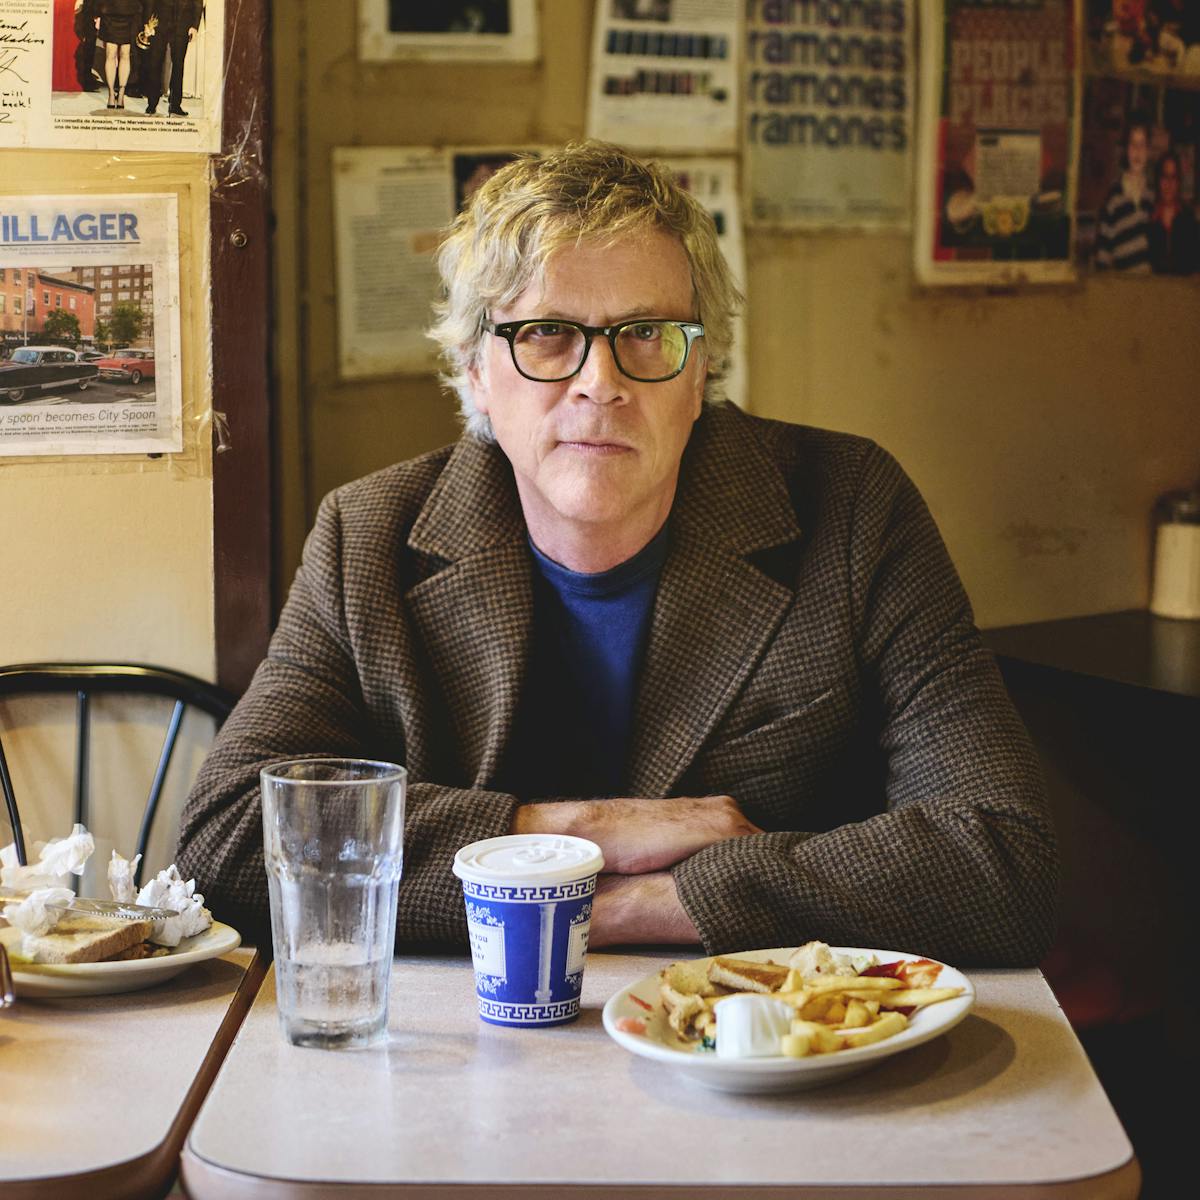 Todd Haynes sits at a diner table drinking coffee and water and eating fries.